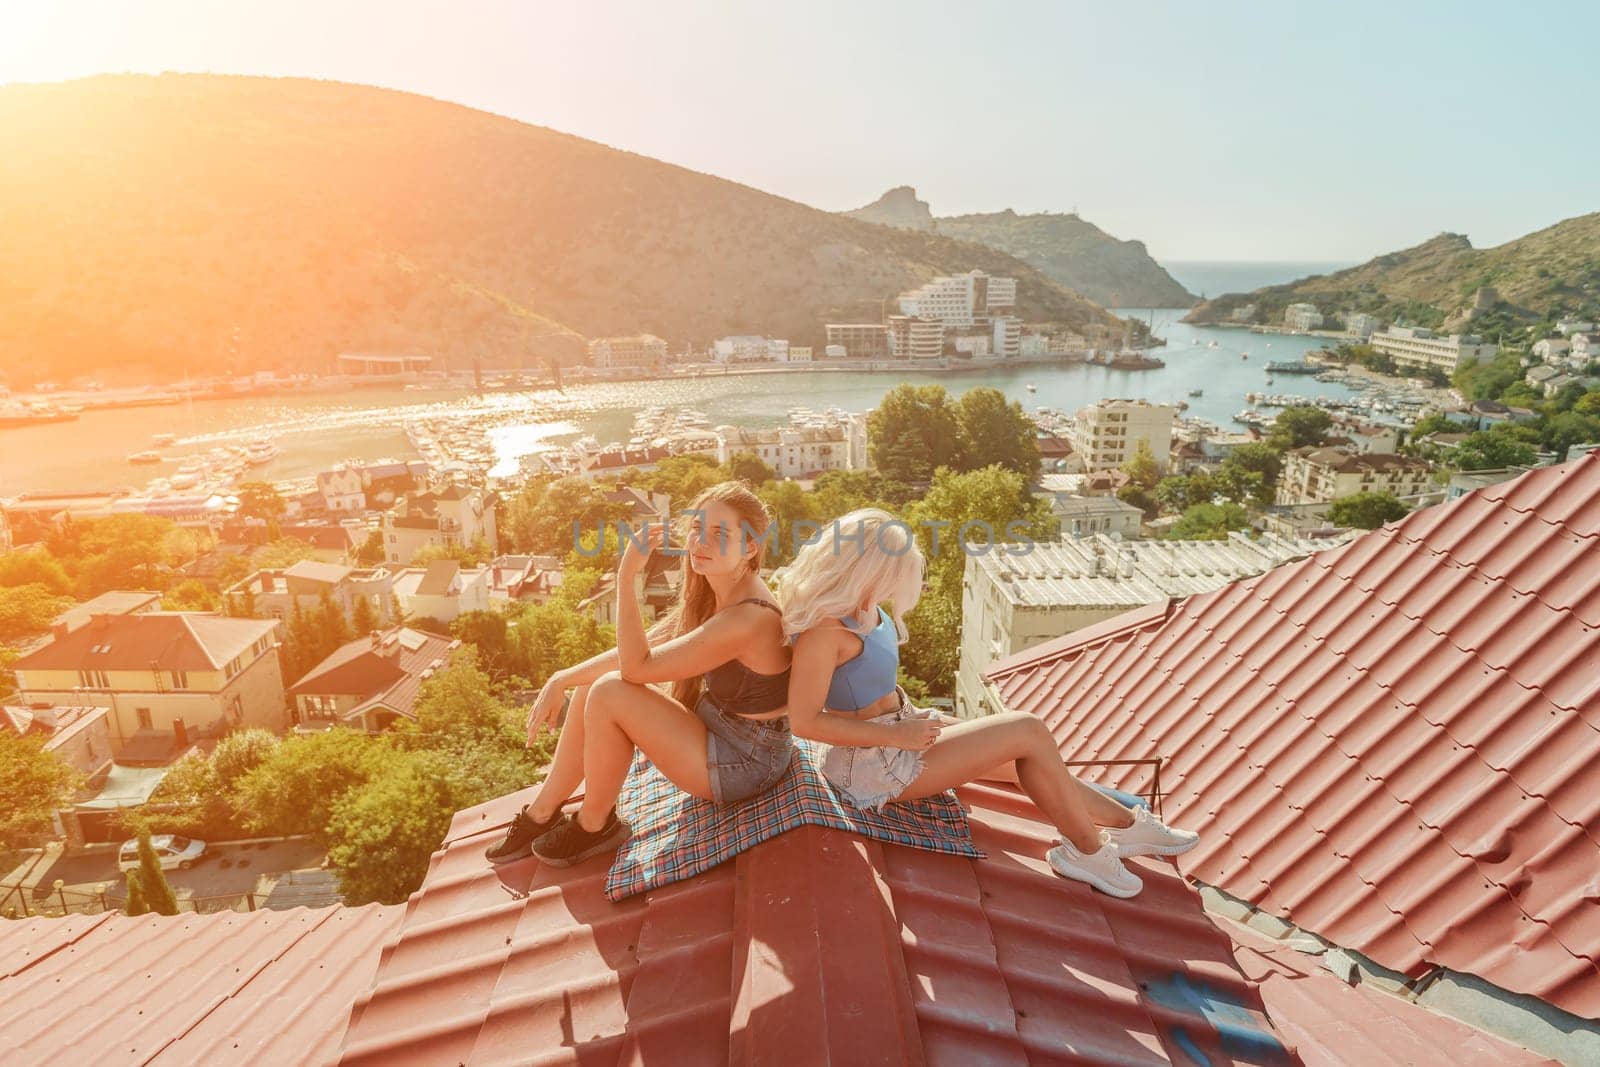 Two women sitting on a red roof, enjoying the view of the town and the sea. Rooftop vantage point. In the background, there are several boats visible on the water, adding to the picturesque scene